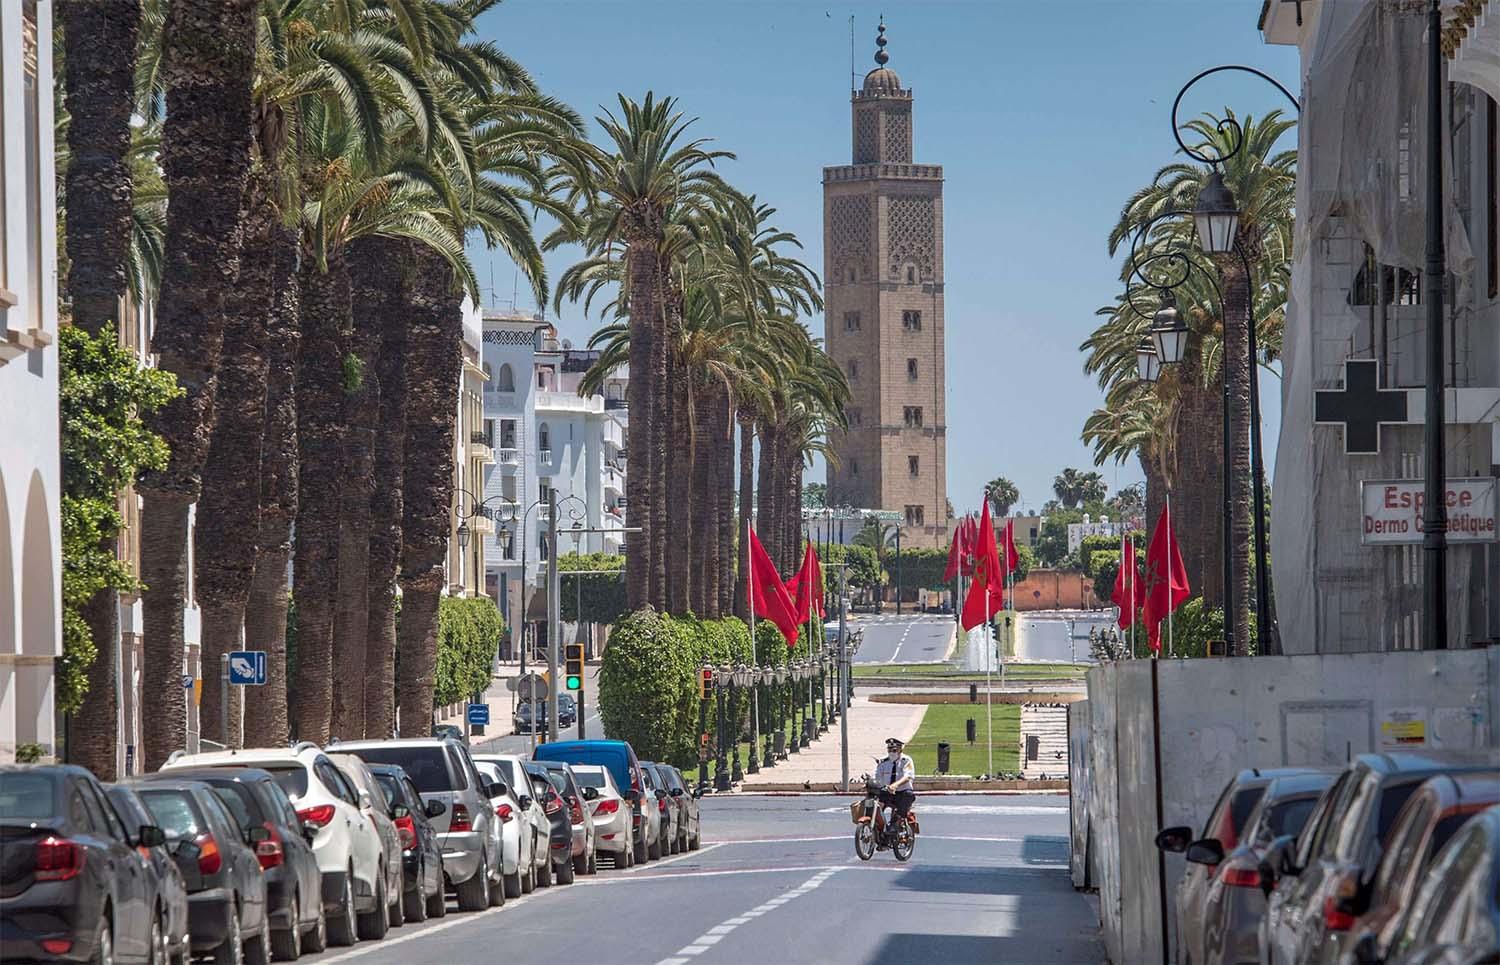 A beautiful view through the streets of rabat, the capital city of Morocco